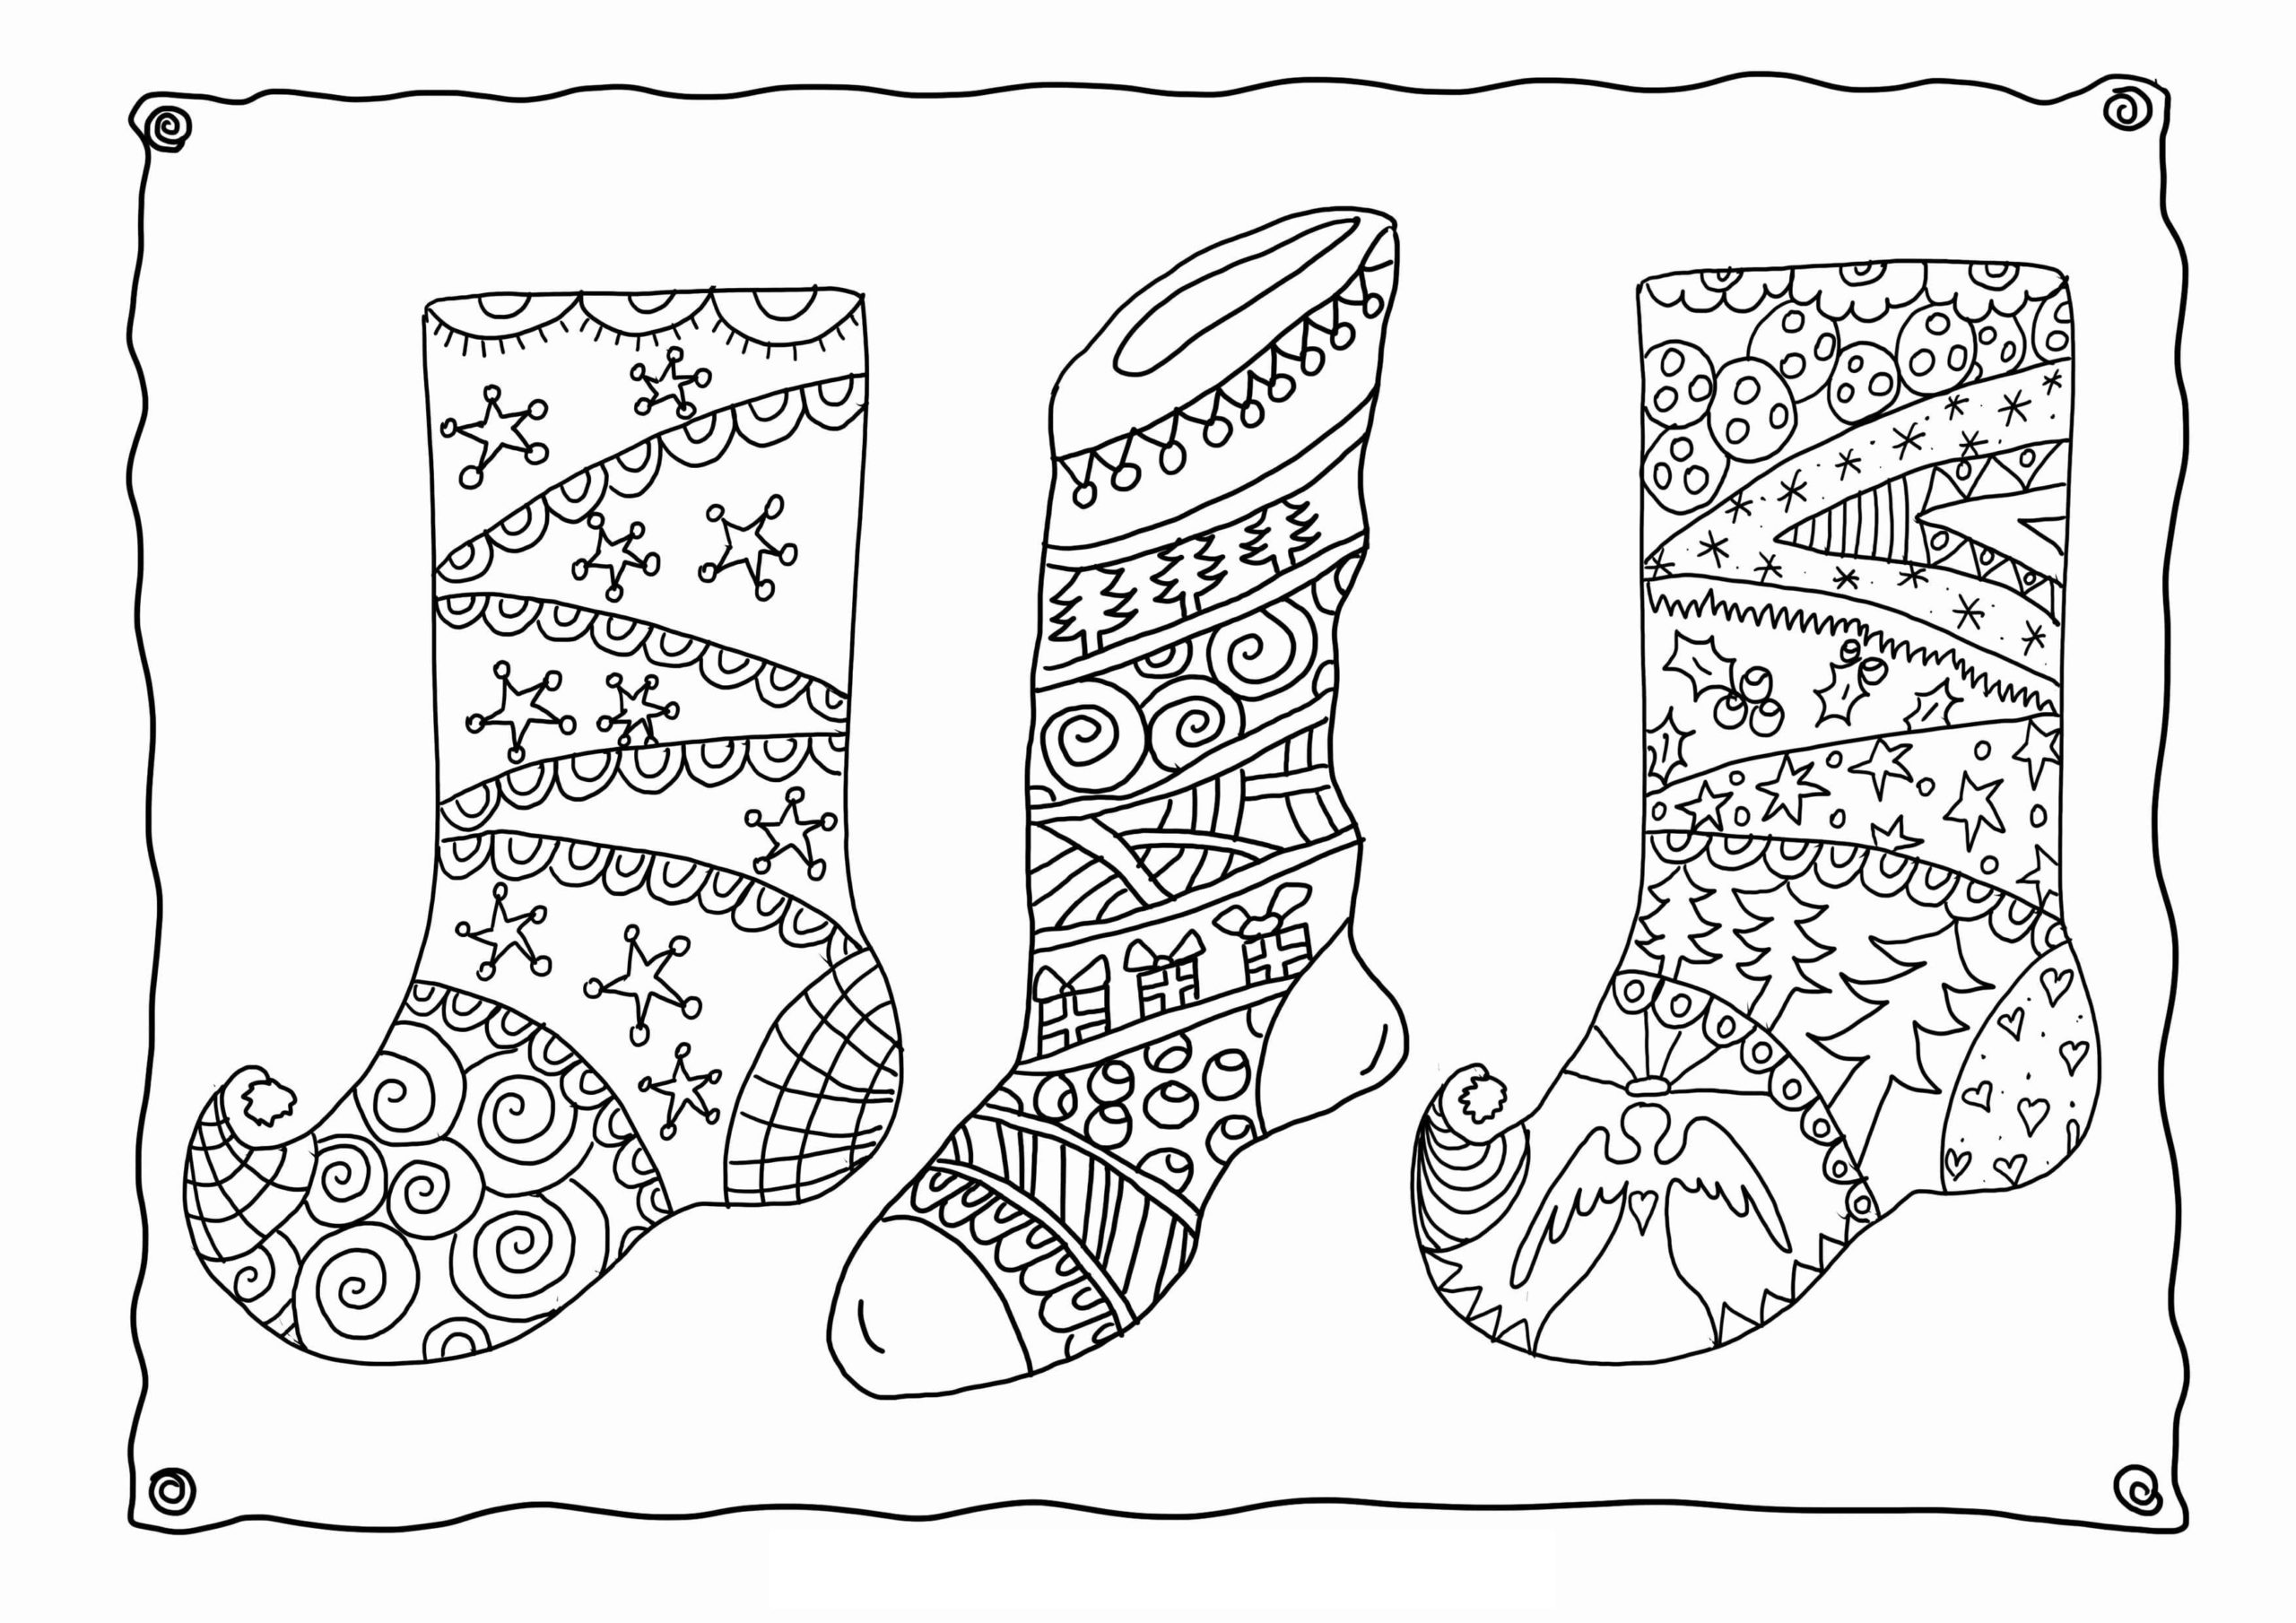 Knitted Socks For Christmas Gifts Coloring Page